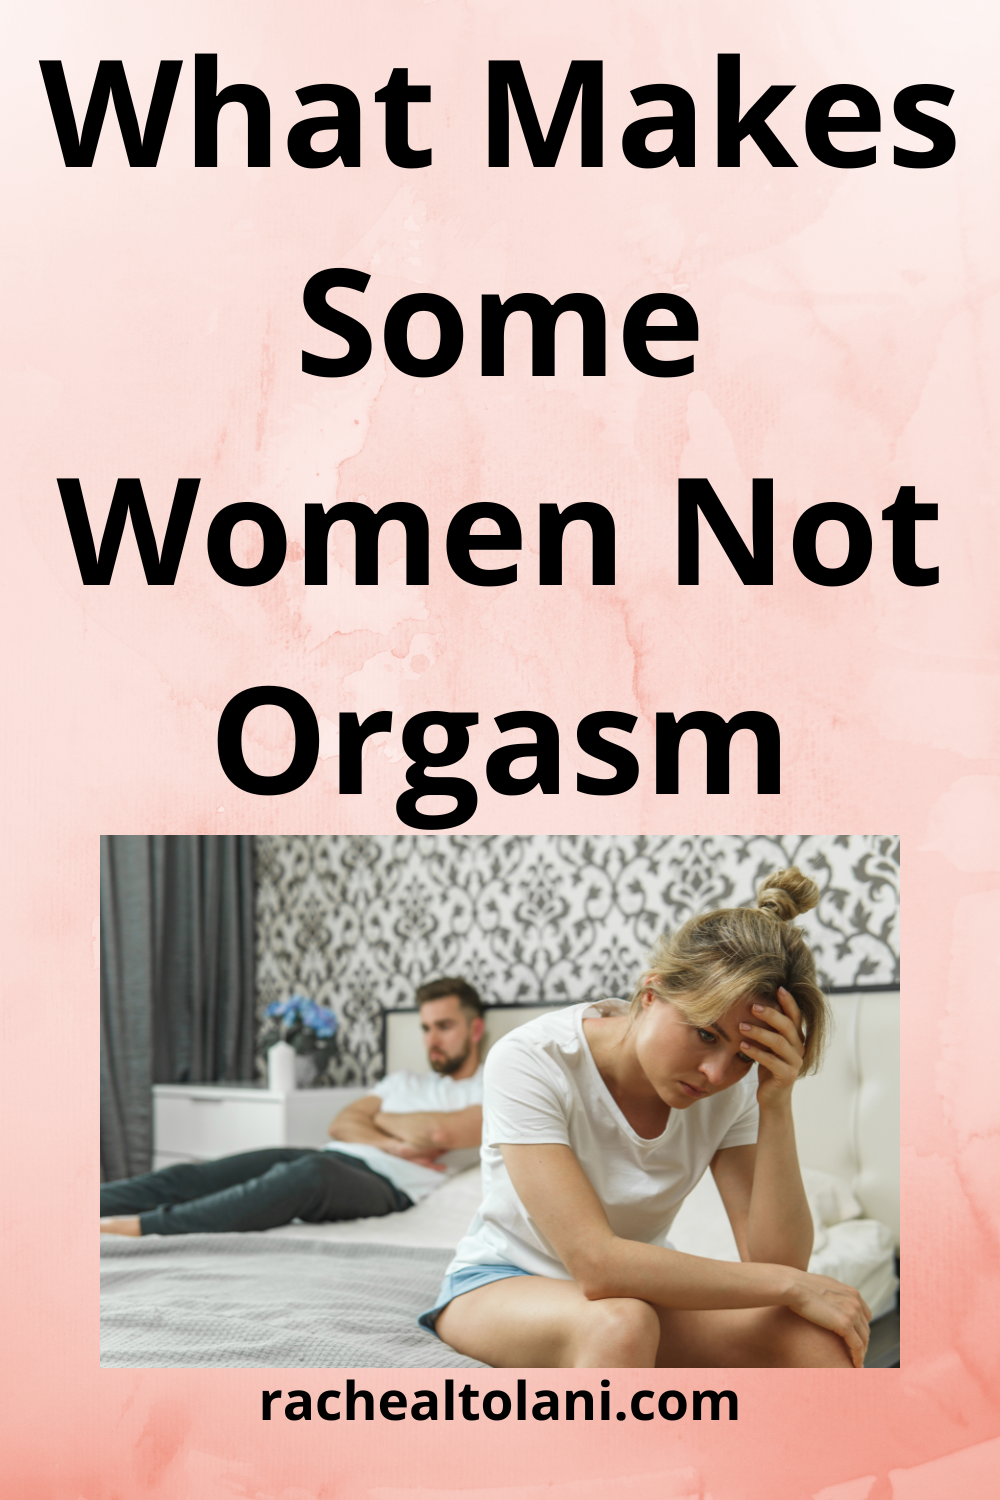 What Makes Some Women Not Orgasm